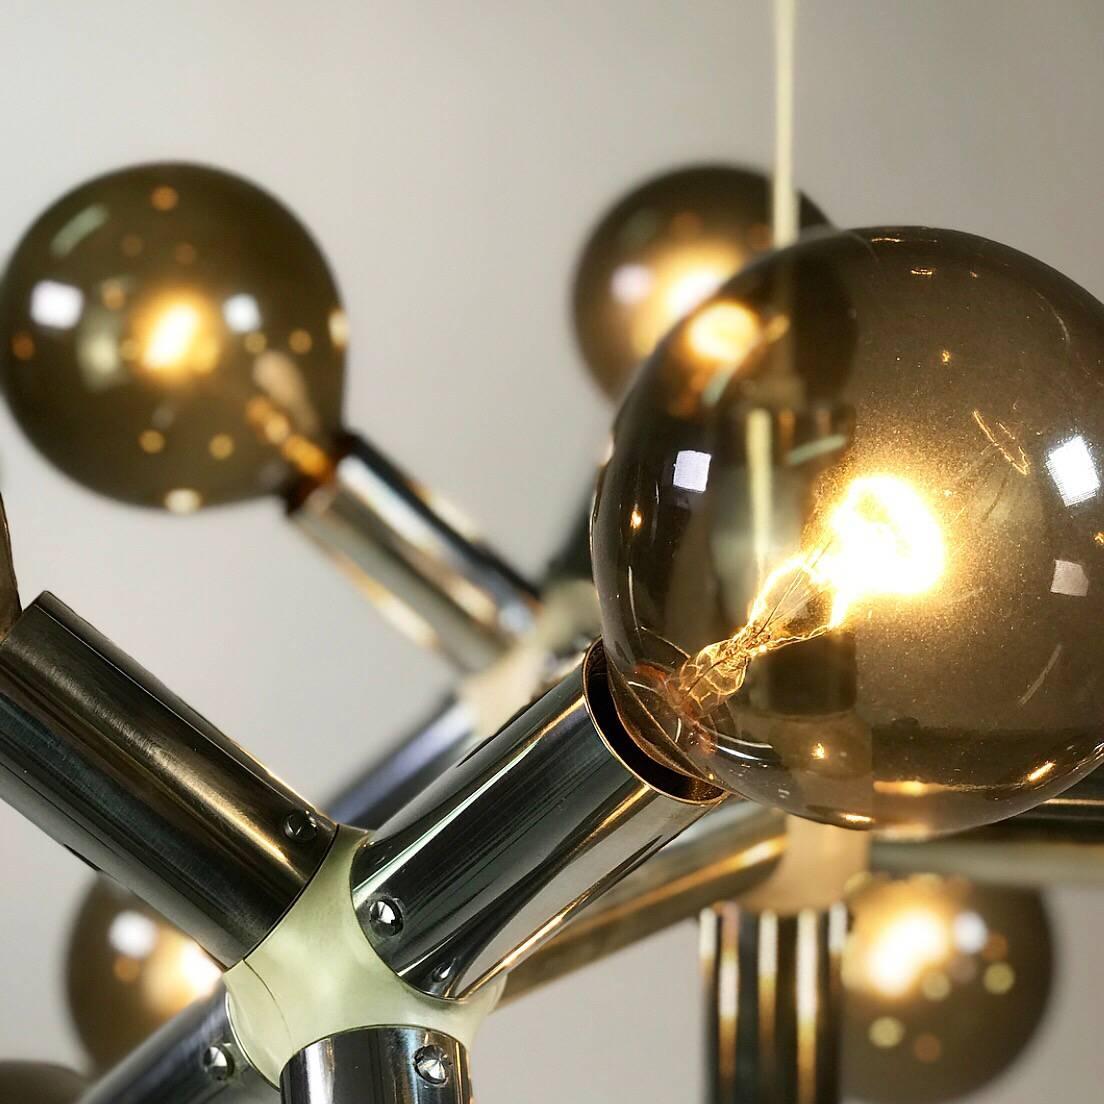 All original stunning piece of Swiss design from the 1960s. 

The atomic age molecule chandelier was designed by the renowned couple Trix and Robert Haussmann and produced by Swiss Lamp International. 

The beautiful chromed chandelier comes